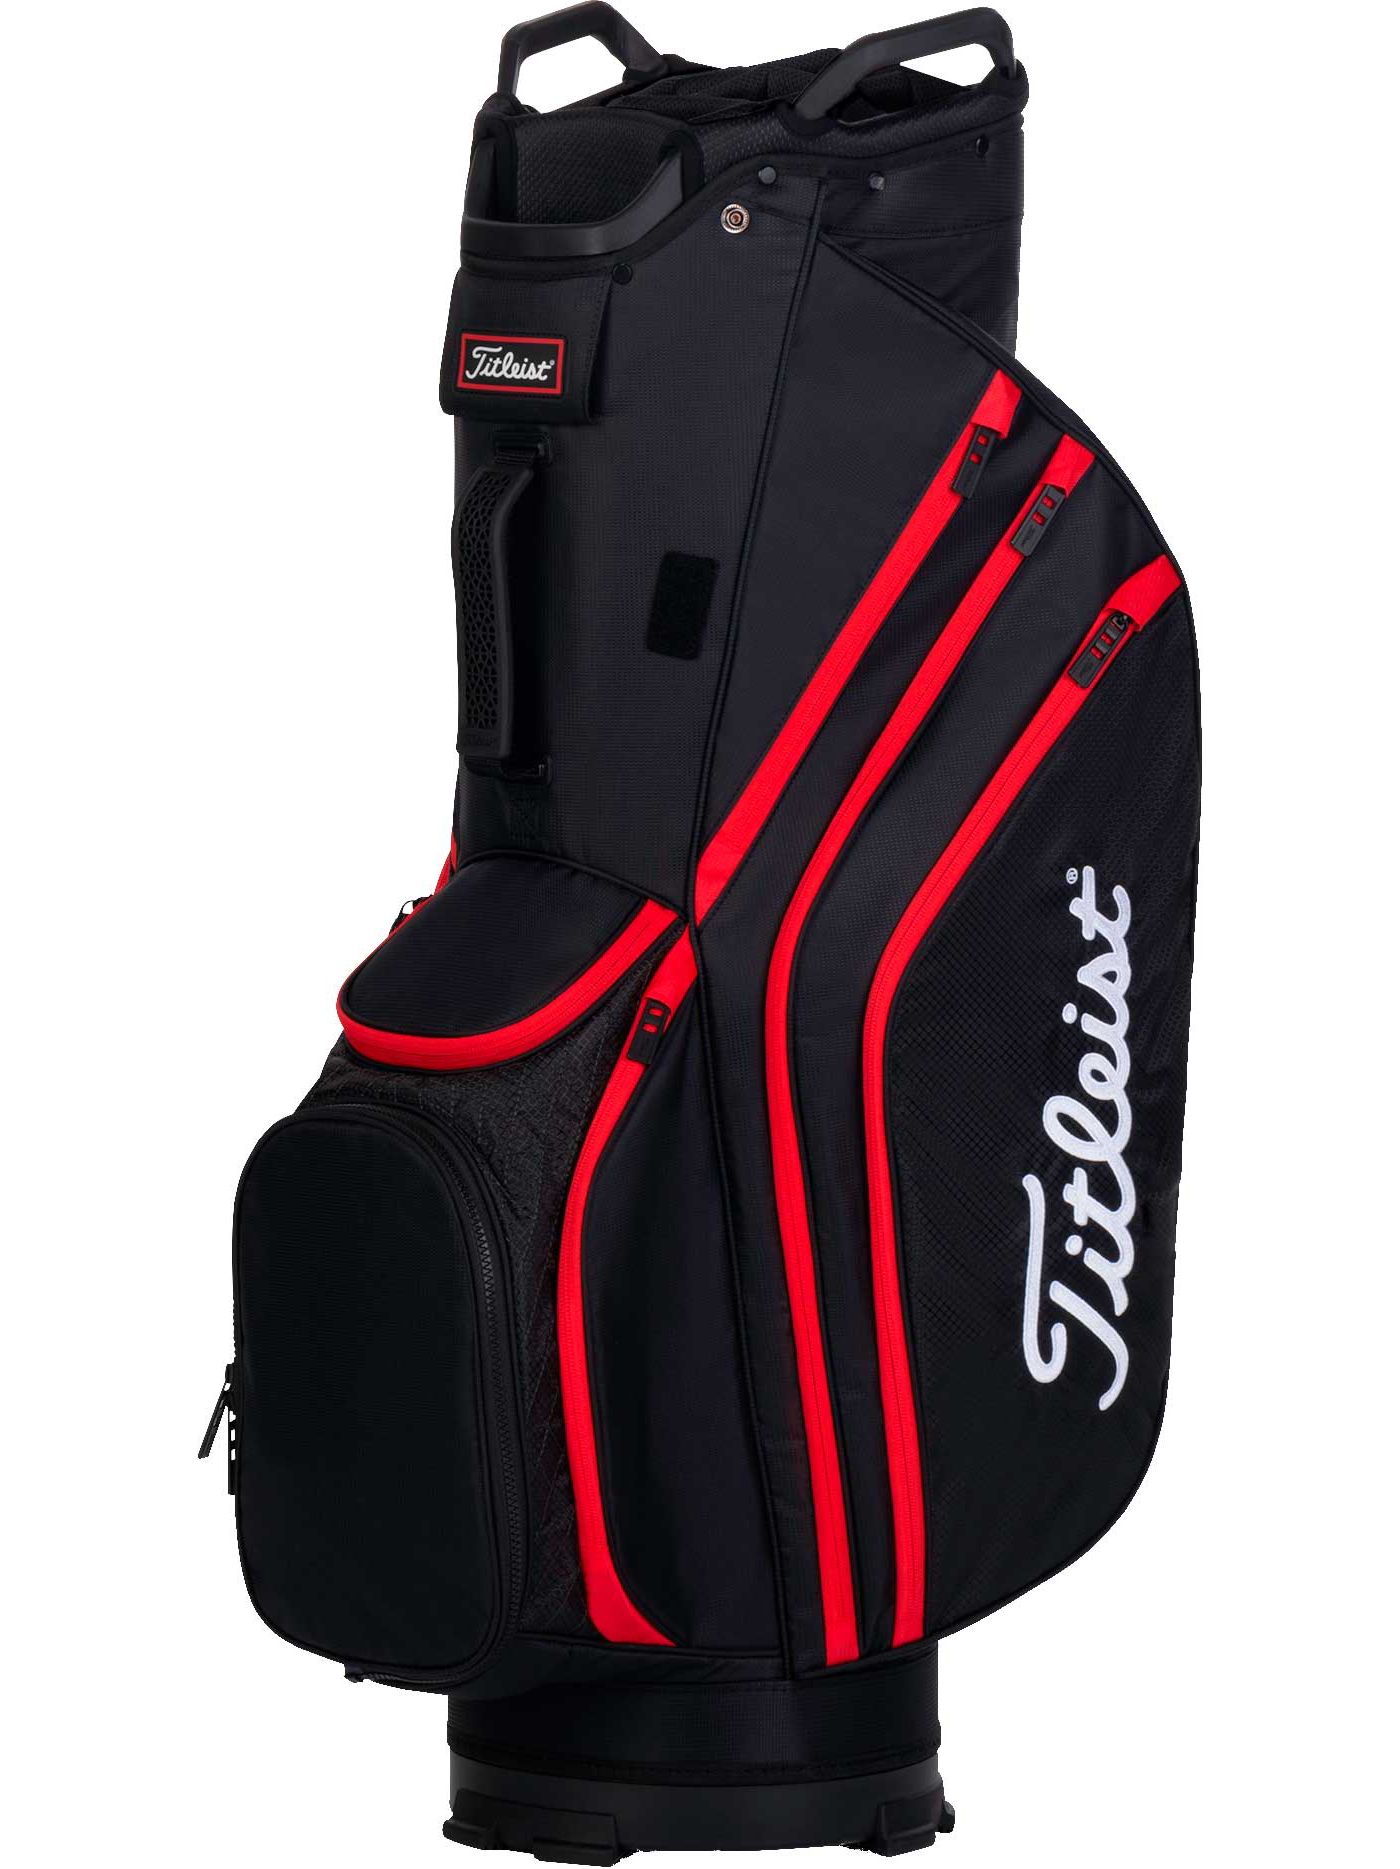 10 Best Golf Stand Bag To Buy In 2020 » STRONGER